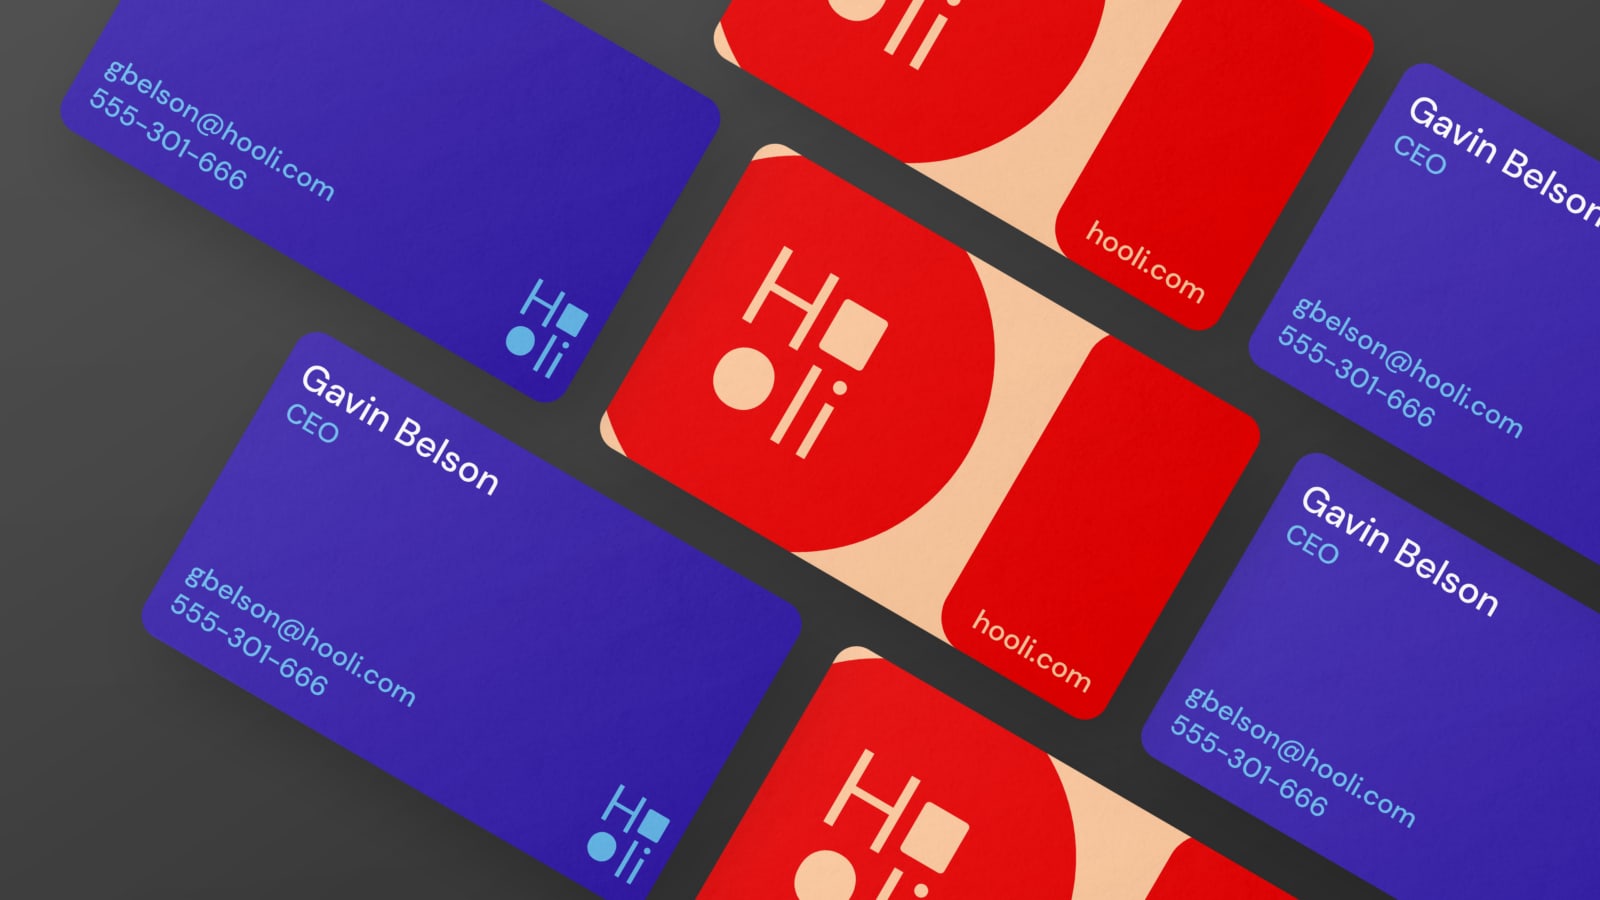 a mockup of a business card of Gavin Belson, CEO of Hooli.